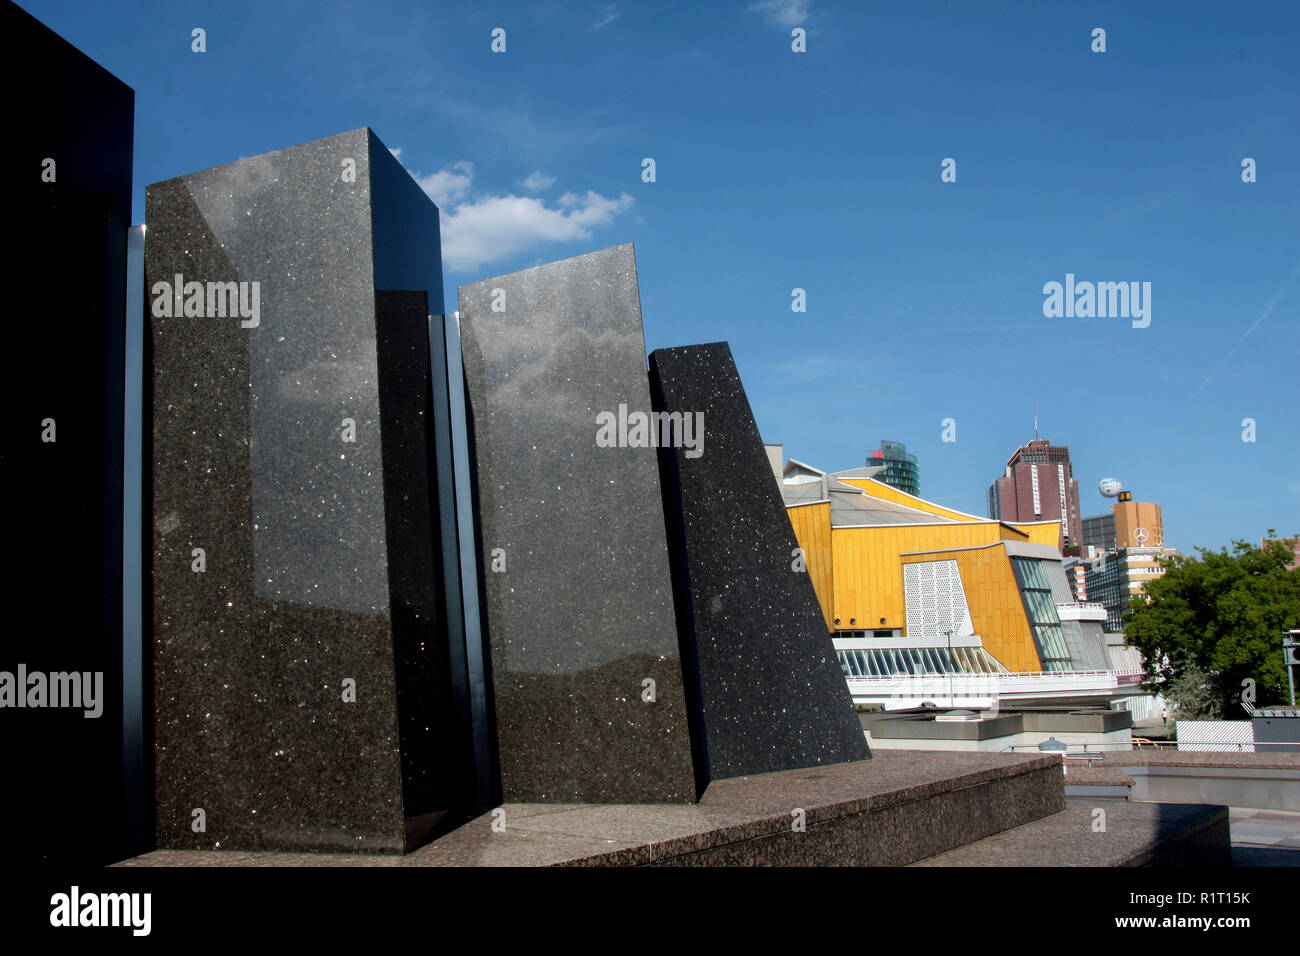 Highly polished marble/granite slabs guide the eye towards the Philharmonie concert hall in Berlin, Germany. Stock Photo